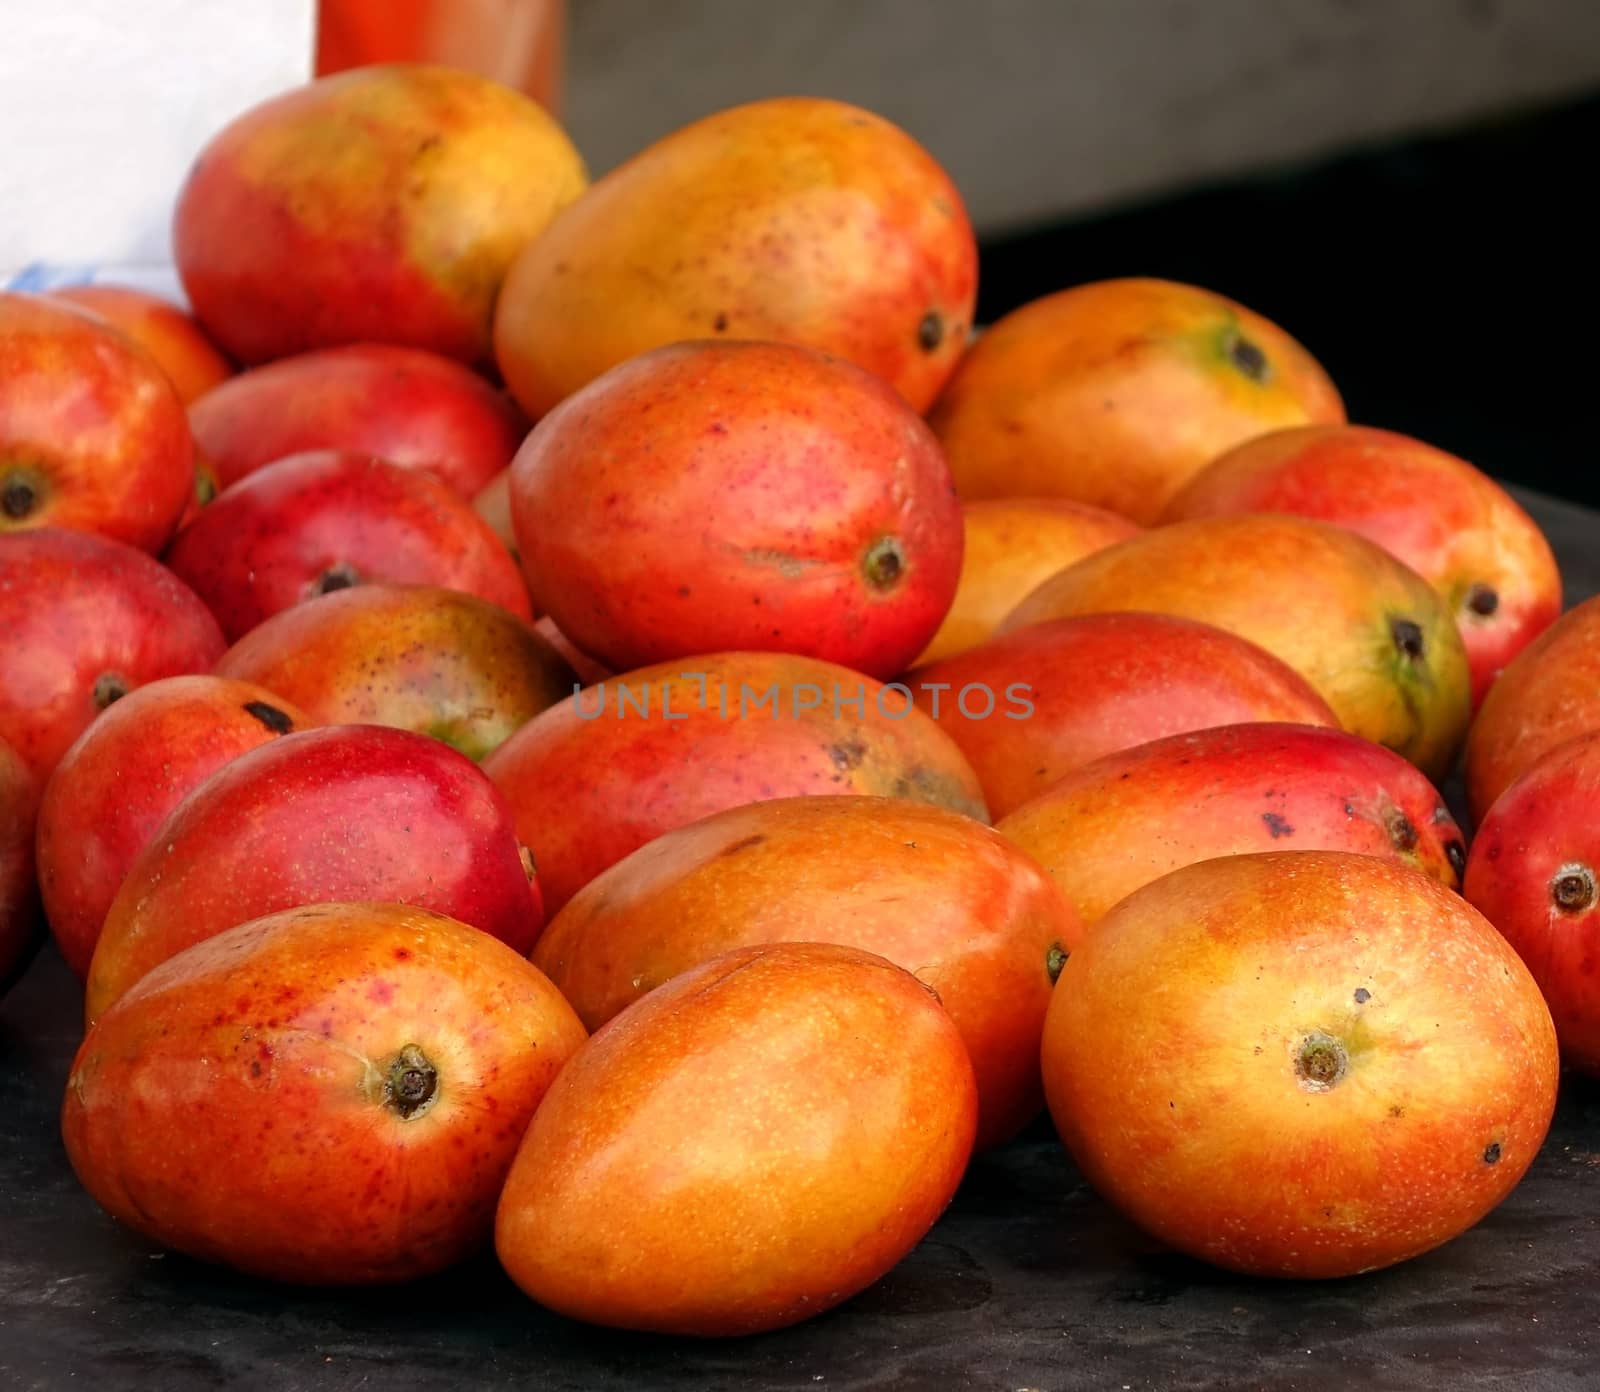 Fresh red Irwin mangoes for sale at an outdoor market